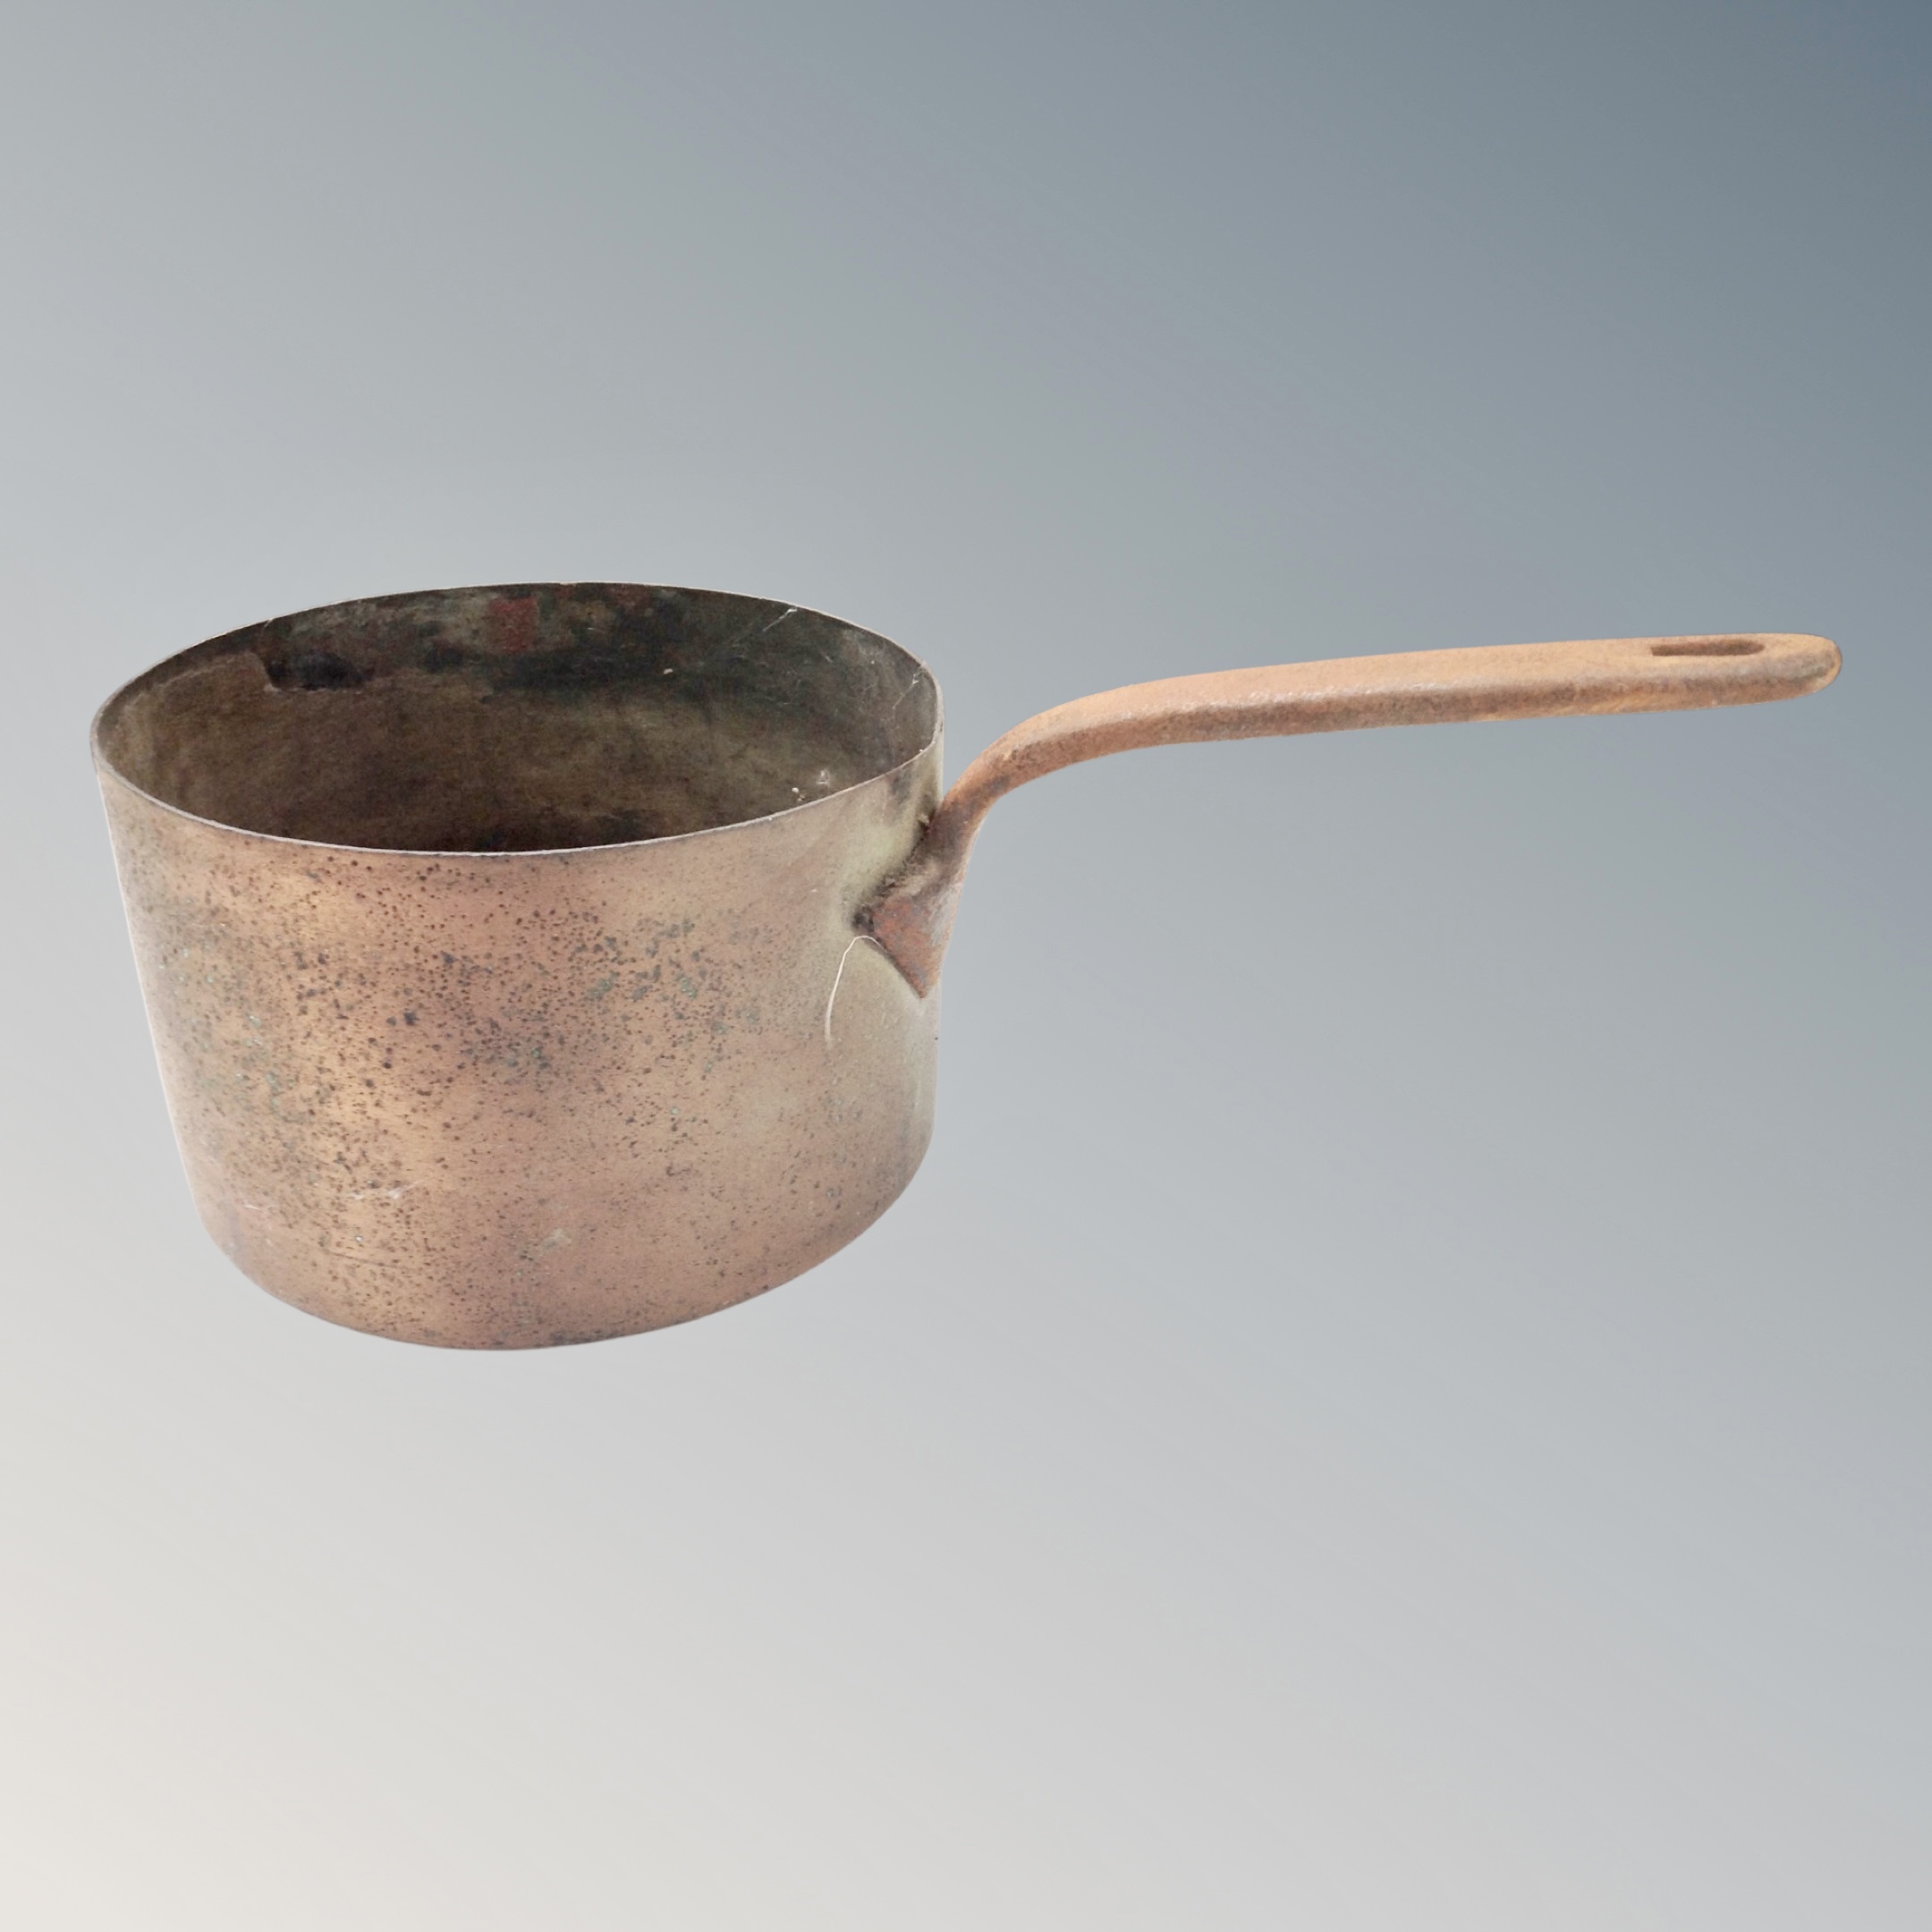 A 19th century cast iron handled cooking pan